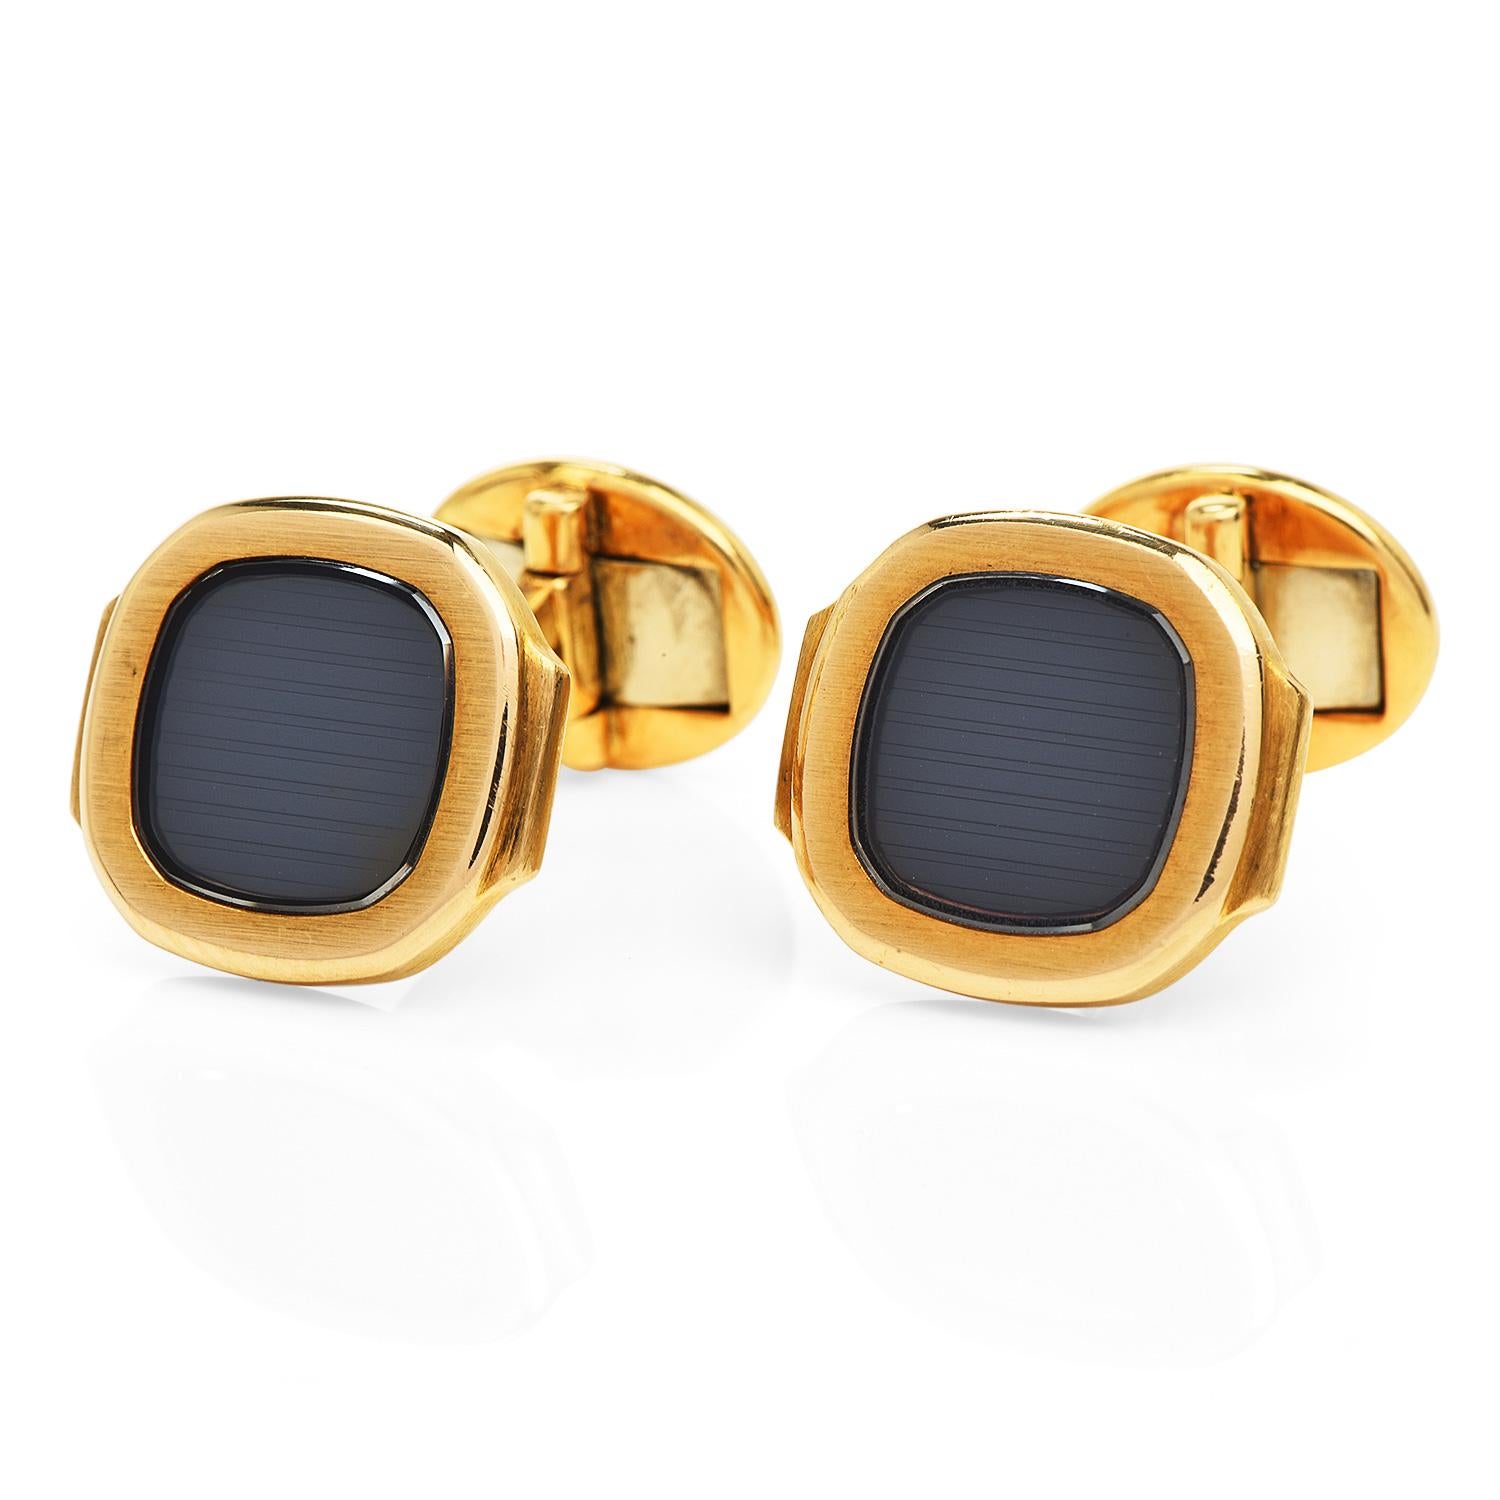 These Vintage collectable Patek Phillippe cufflinks were crafted in 18K yellow gold.

These Nautilus series Collectable CuffLinks have a 

 sapphire Gray crystal for the Nautilus series. 

Hallmarked and purity marked.

Remain in Excellent